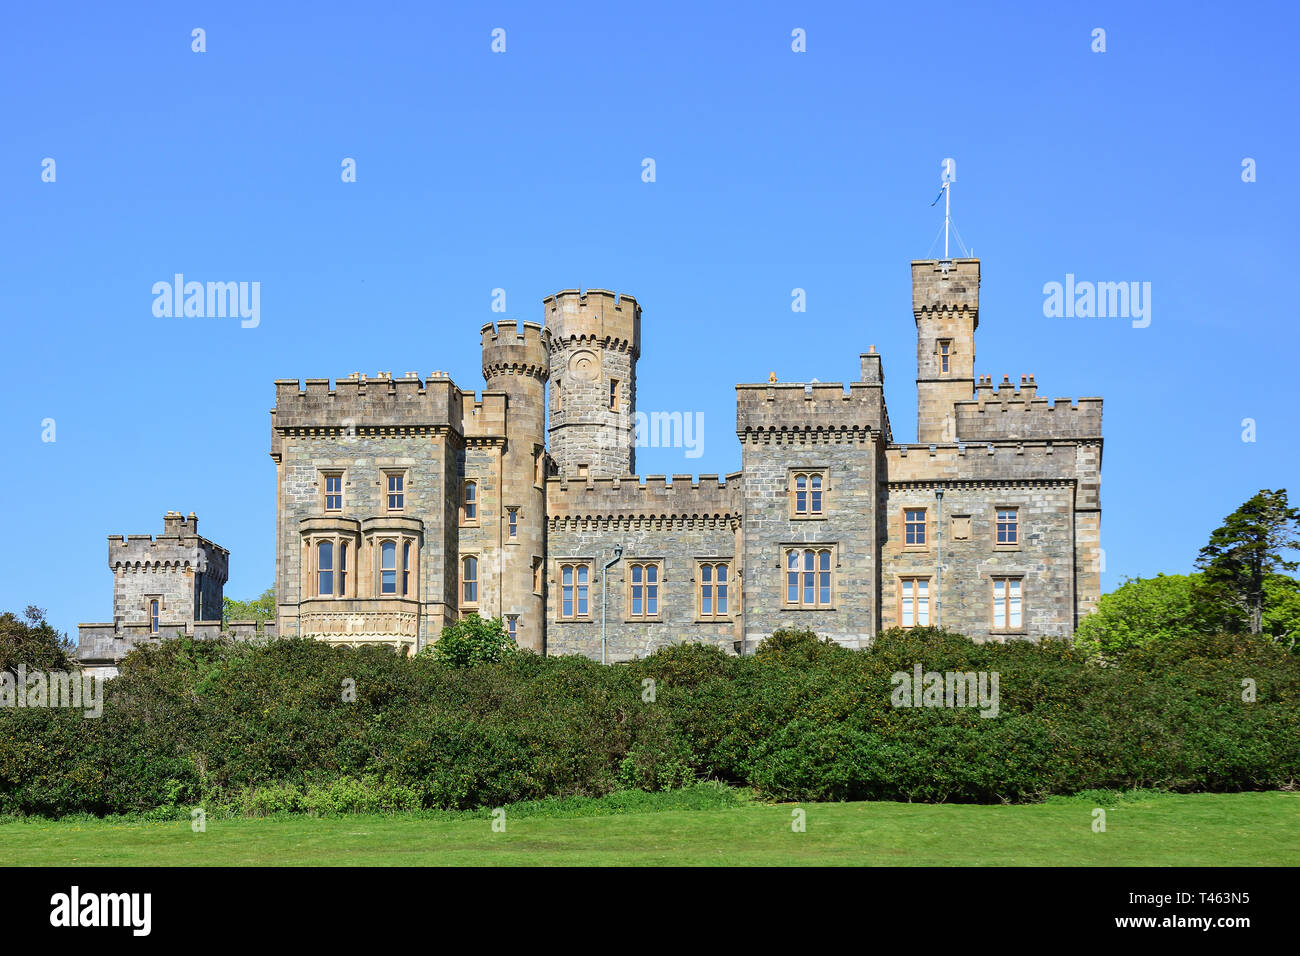 Lews Castle and grounds, Stornoway, Isle of Lewis, Outer Hebrides, Na h-Eileanan Siar, Scotland, United Kingdom Stock Photo